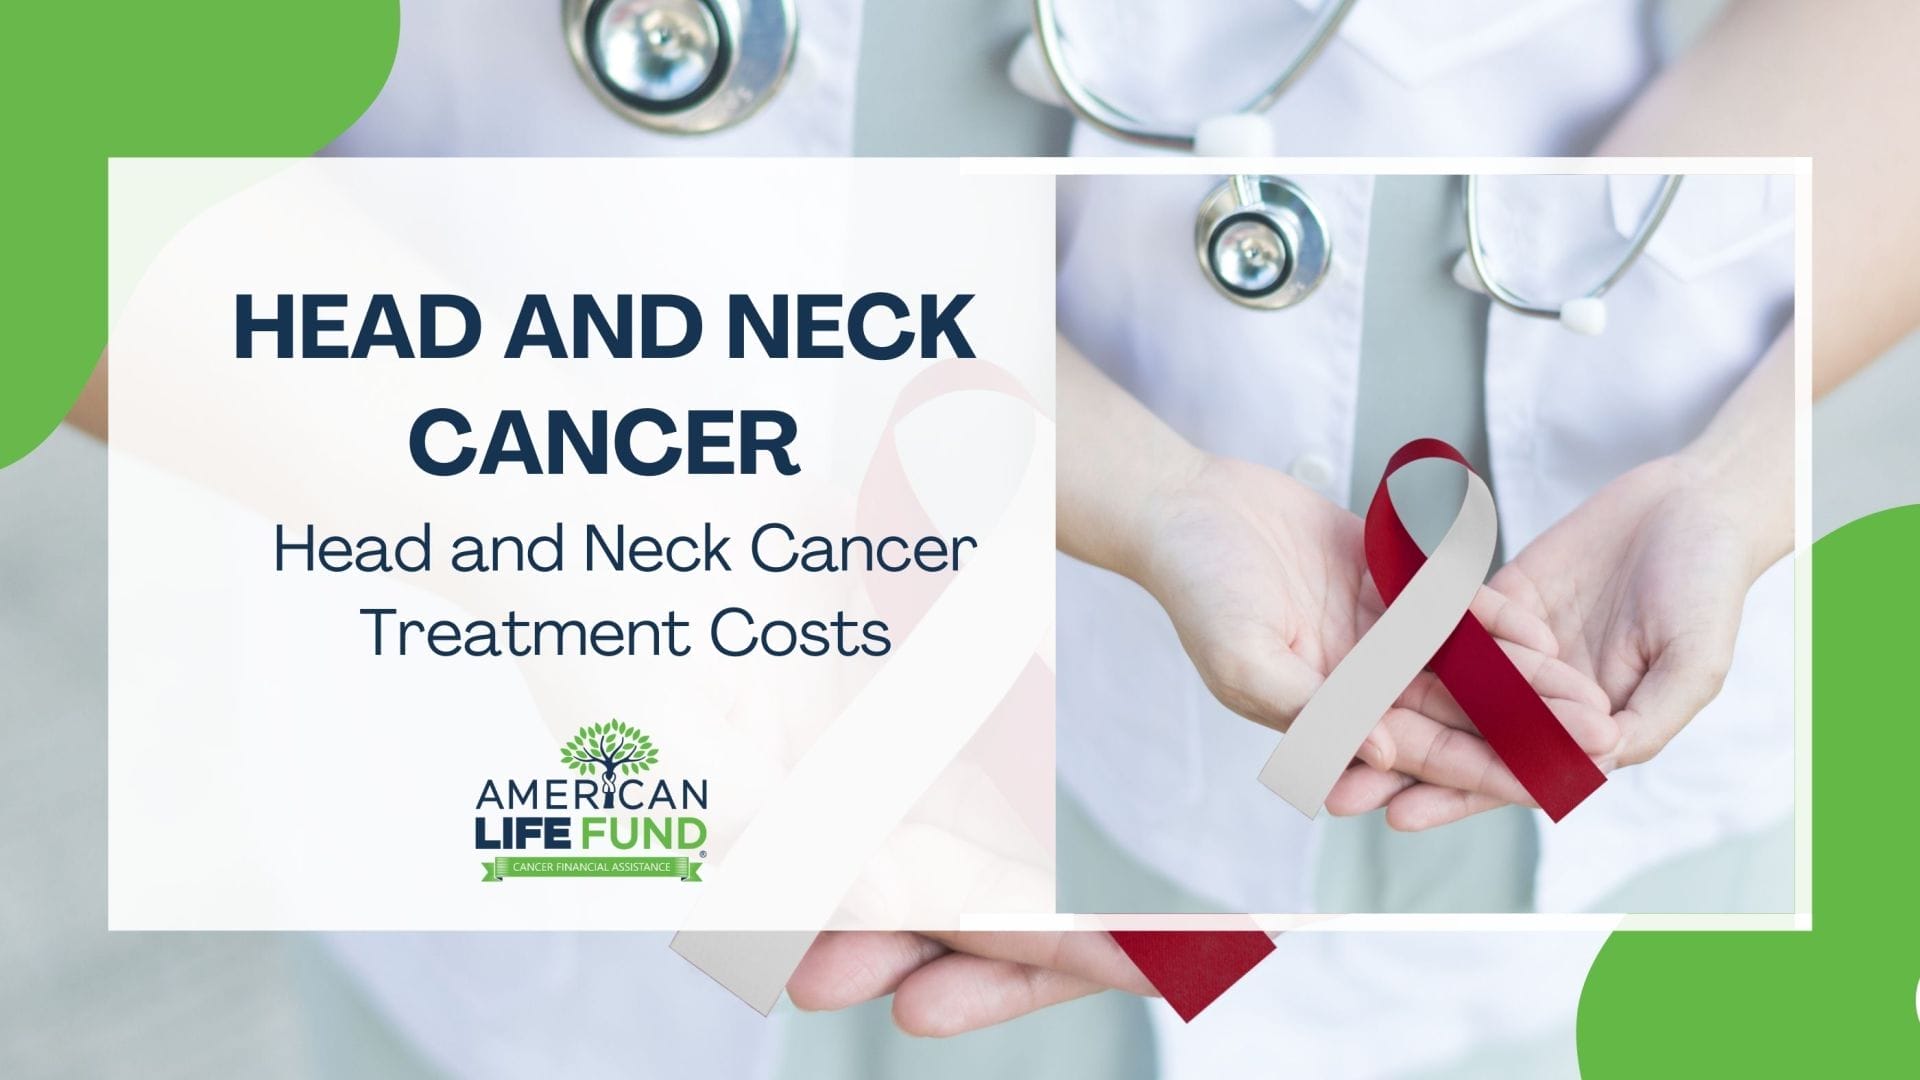 An informative graphic highlighting "Head and Neck Cancer Treatment Costs" with a two-sided layout. On the left, a medical professional in a white coat with a stethoscope around their neck, indicative of medical care. On the right, two hands gently holding a burgundy and cream awareness ribbon, symbolizing support for head and neck cancer. The American Life Fund logo is present, indicating financial assistance for cancer care.